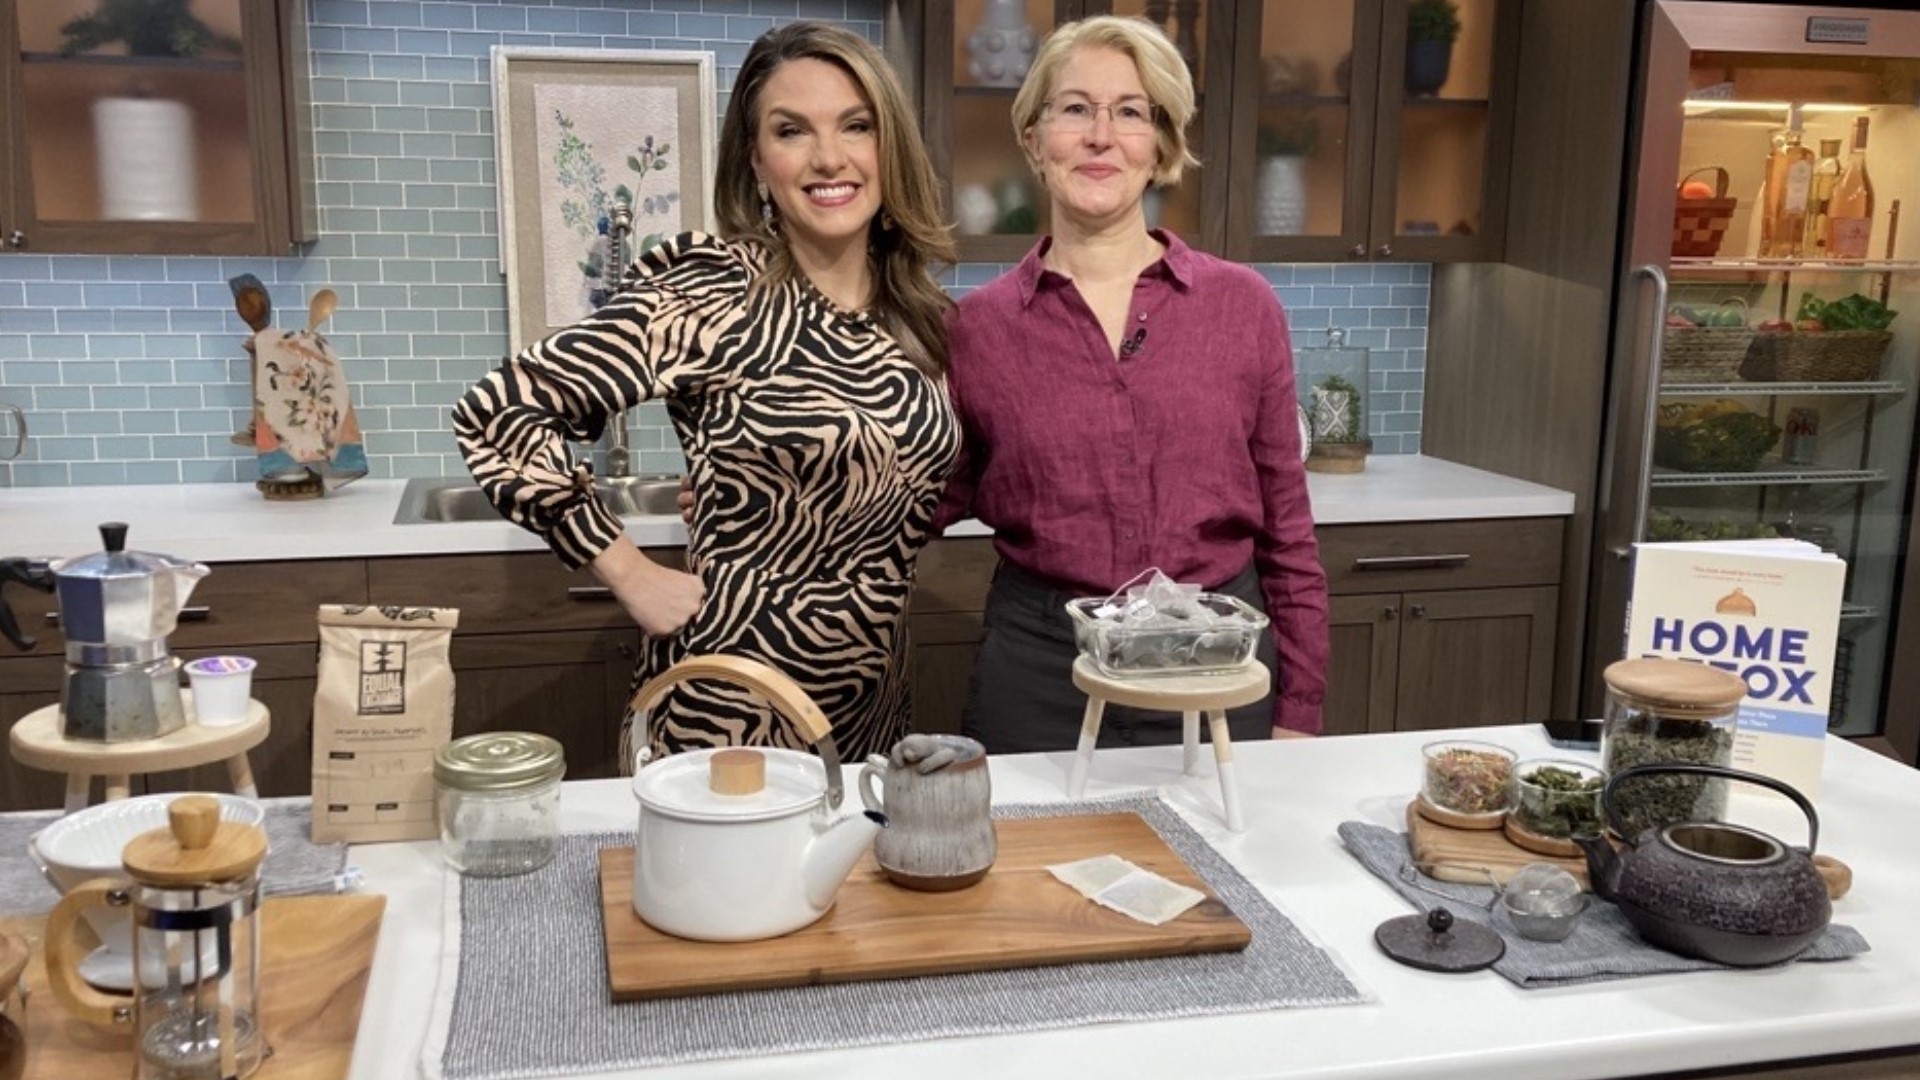 Nutritionist and clinical practitioner Daniella Chase joined the show to discuss her new book, "Detox," and share tips on how to make our homes healthier. #newdaynw